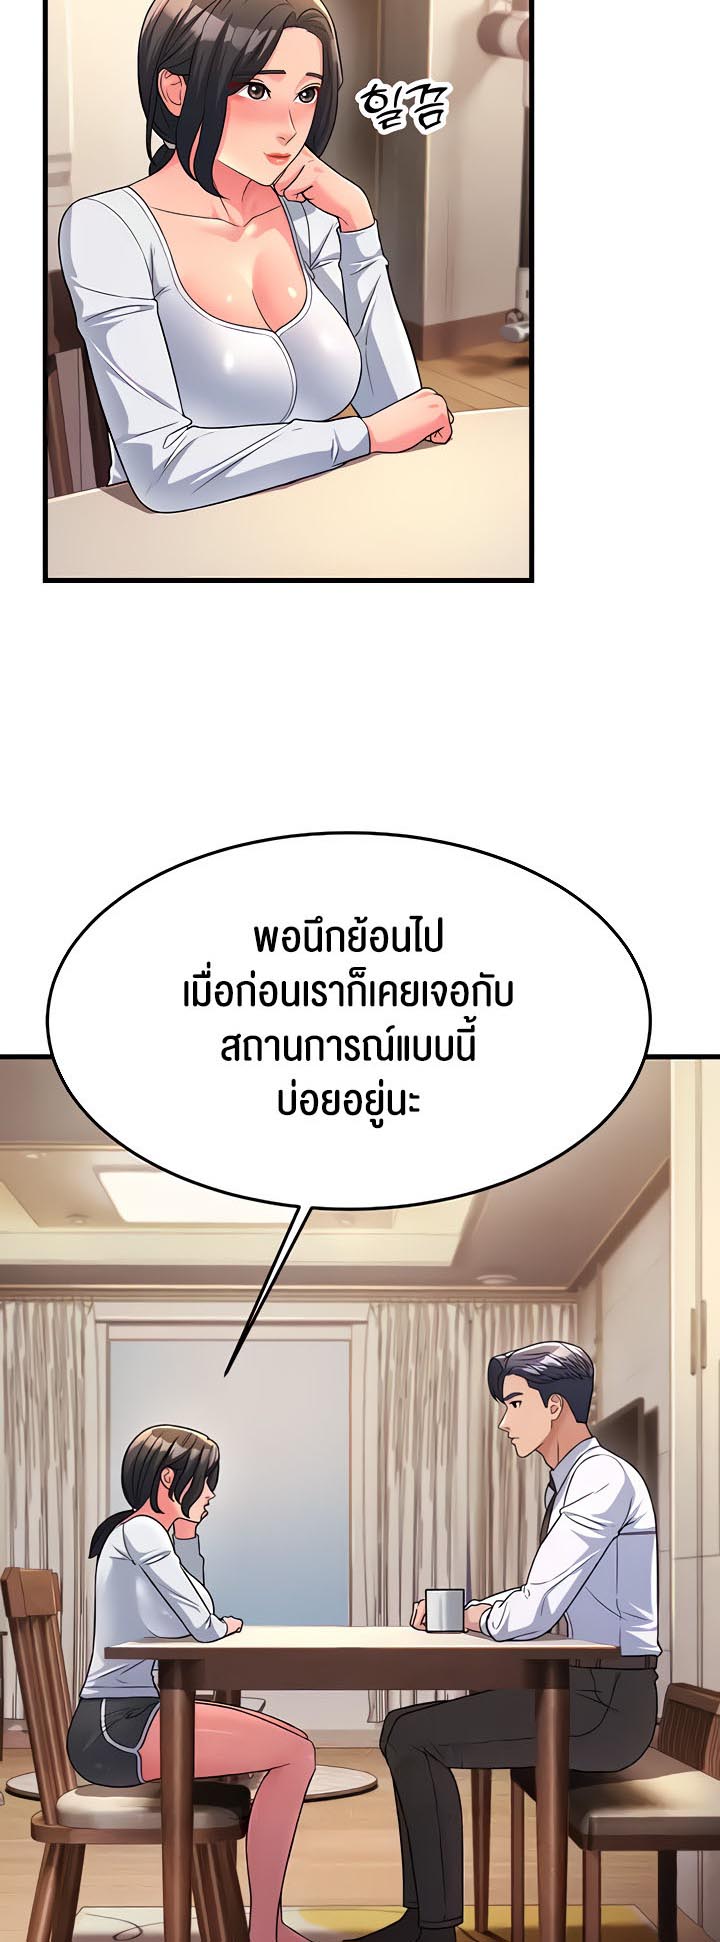 à¸­à¹ˆà¸²à¸™à¹‚à¸”à¸ˆà¸´à¸™ à¹€à¸£à¸·à¹ˆà¸­à¸‡ Mother in Law Bends To My Will 11 16